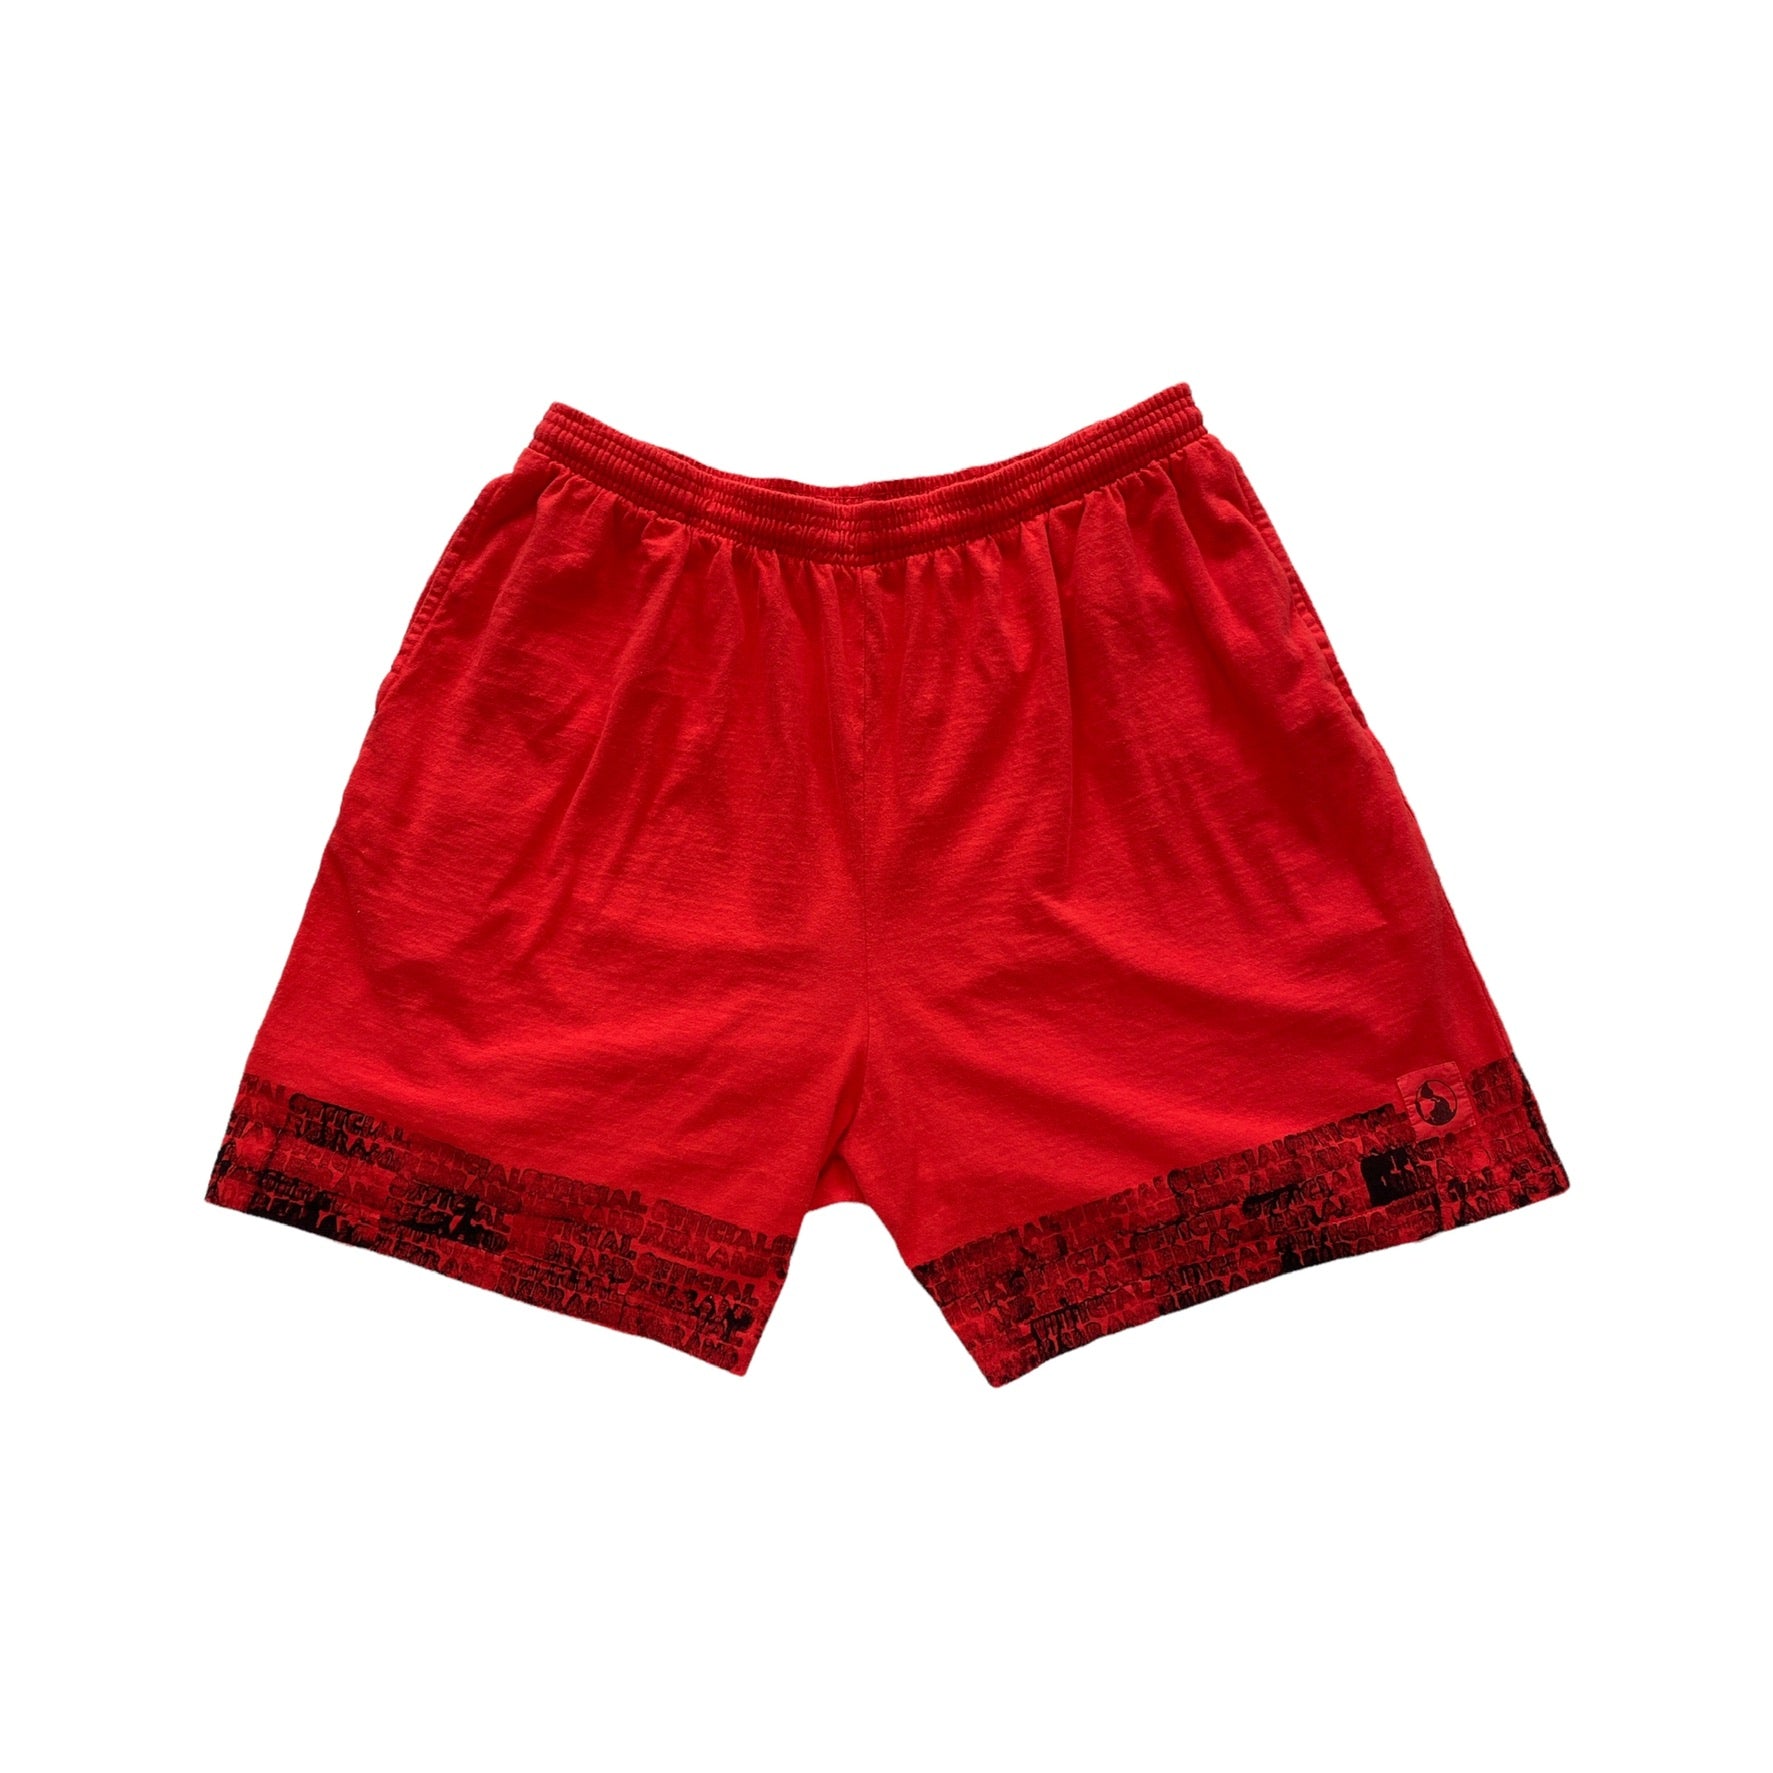 OR?! STAMPED shorts